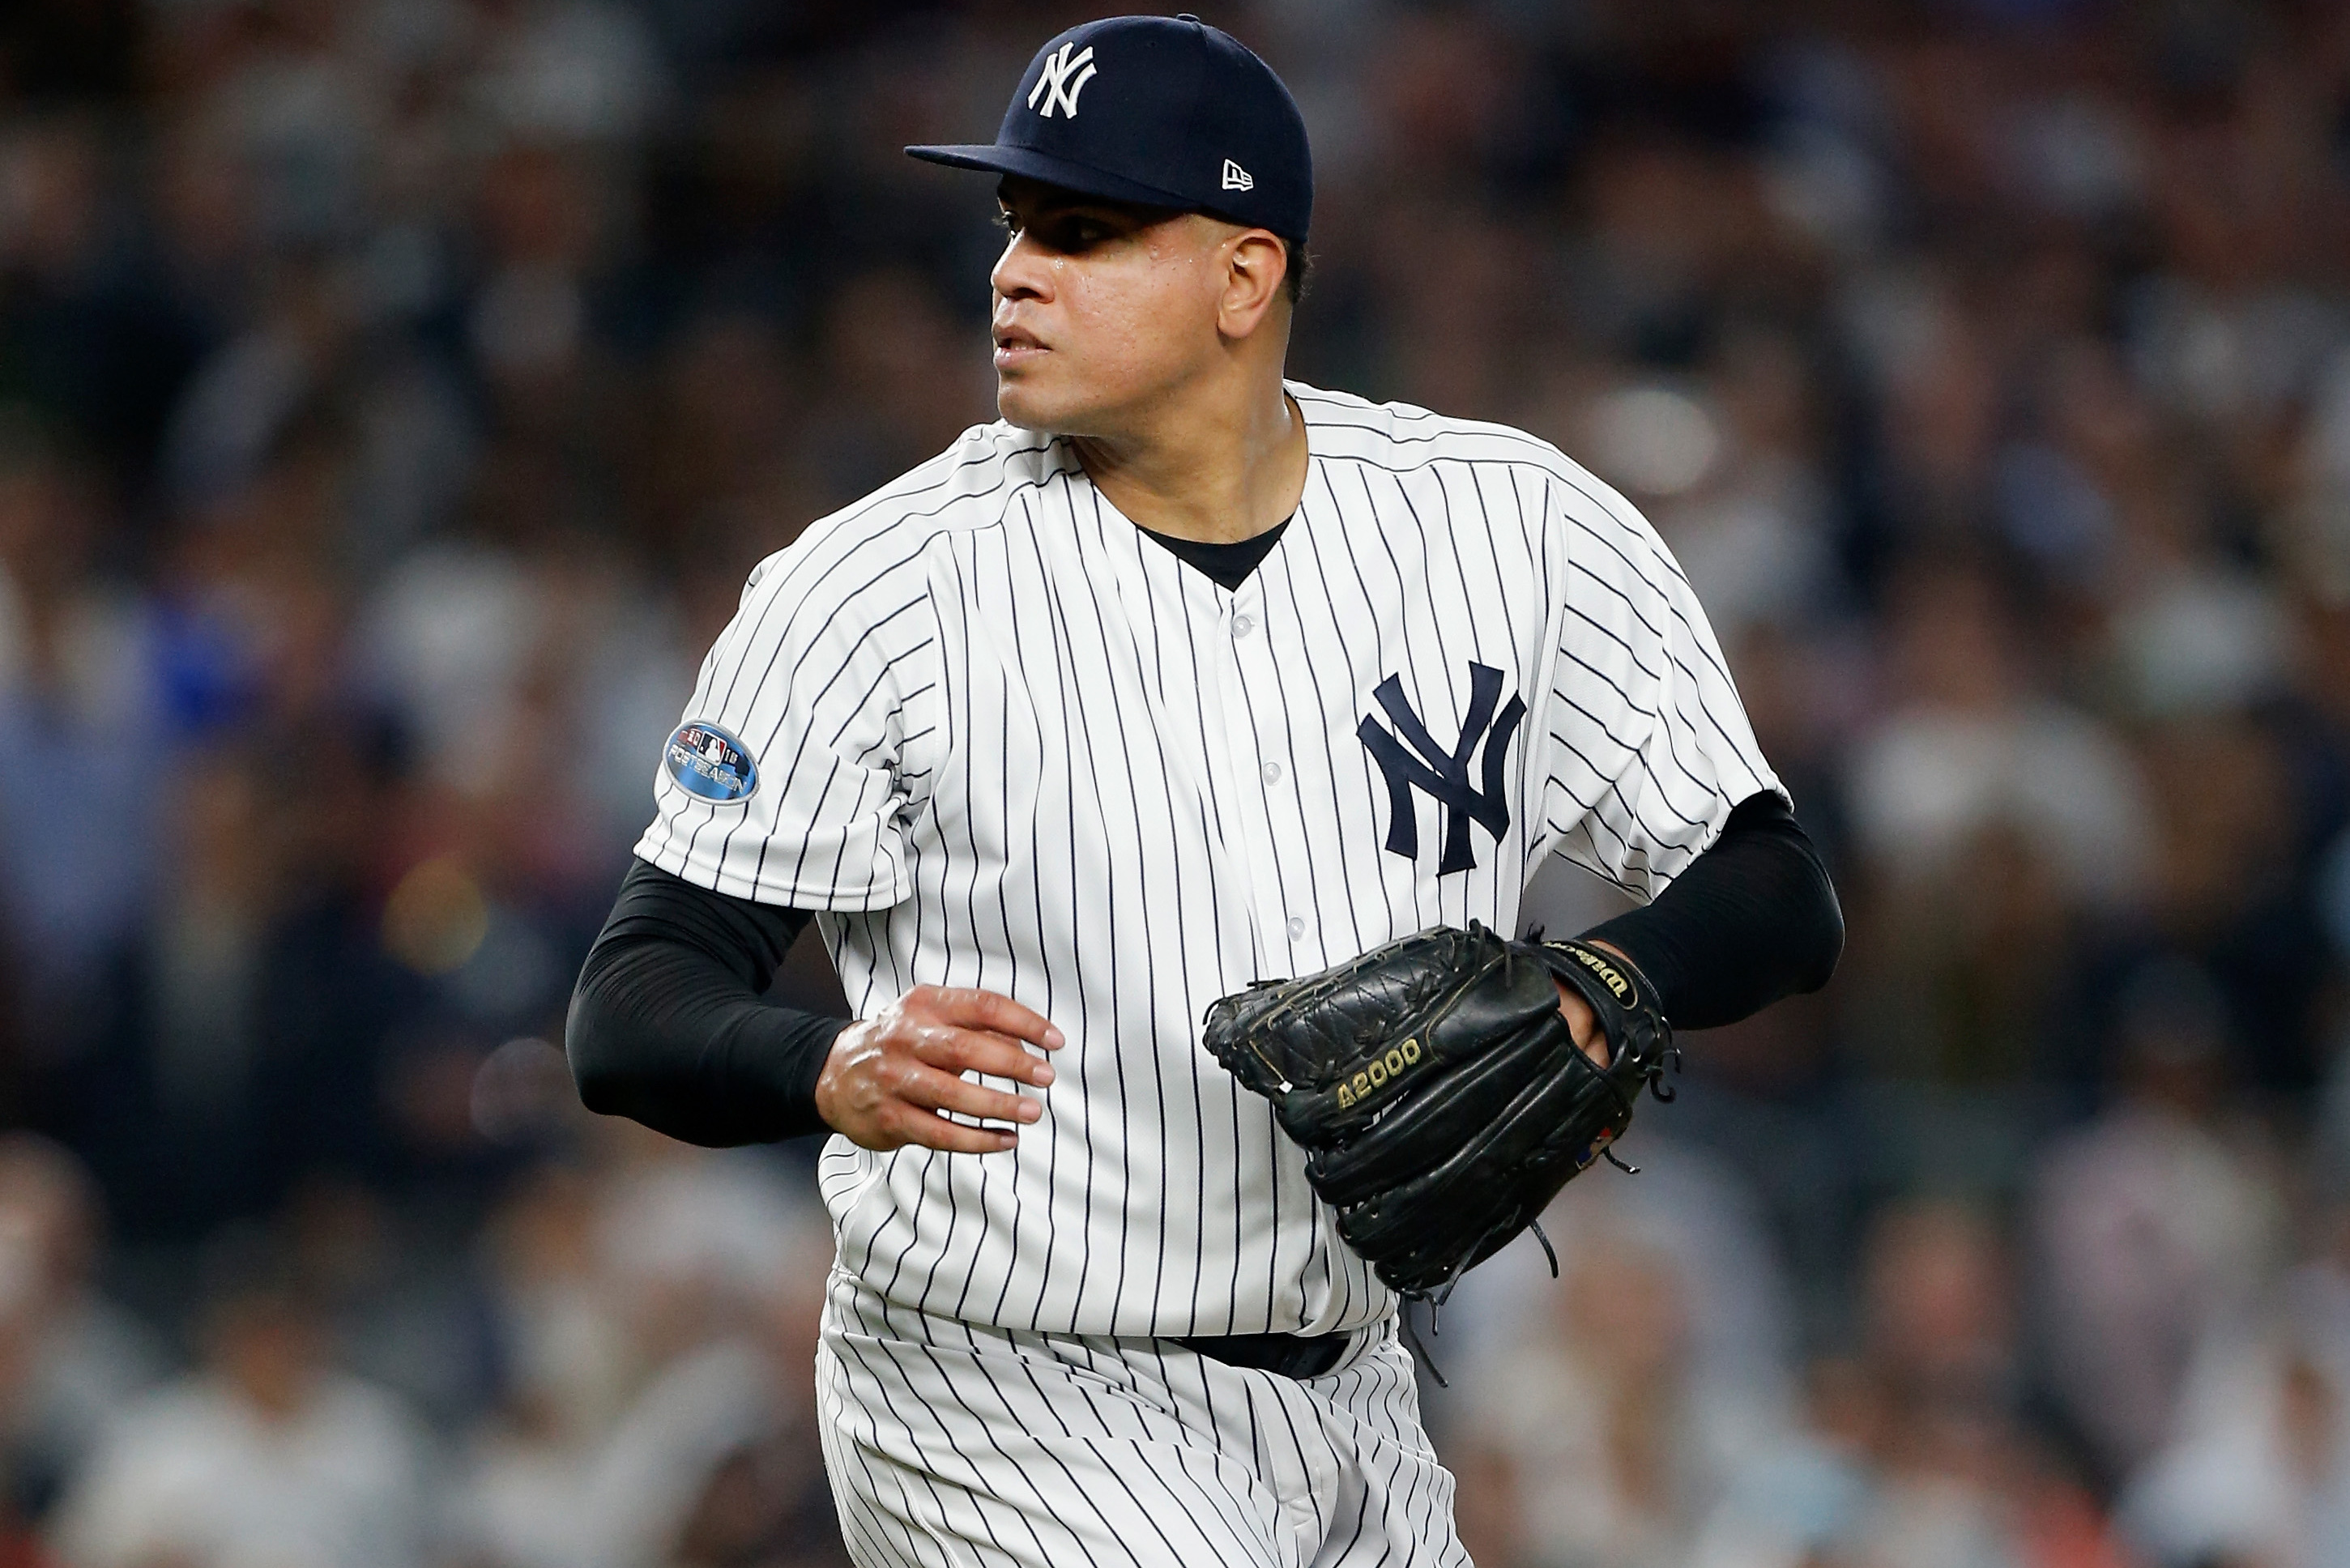 Dellin Betances is new face of New York Yankees - ESPN